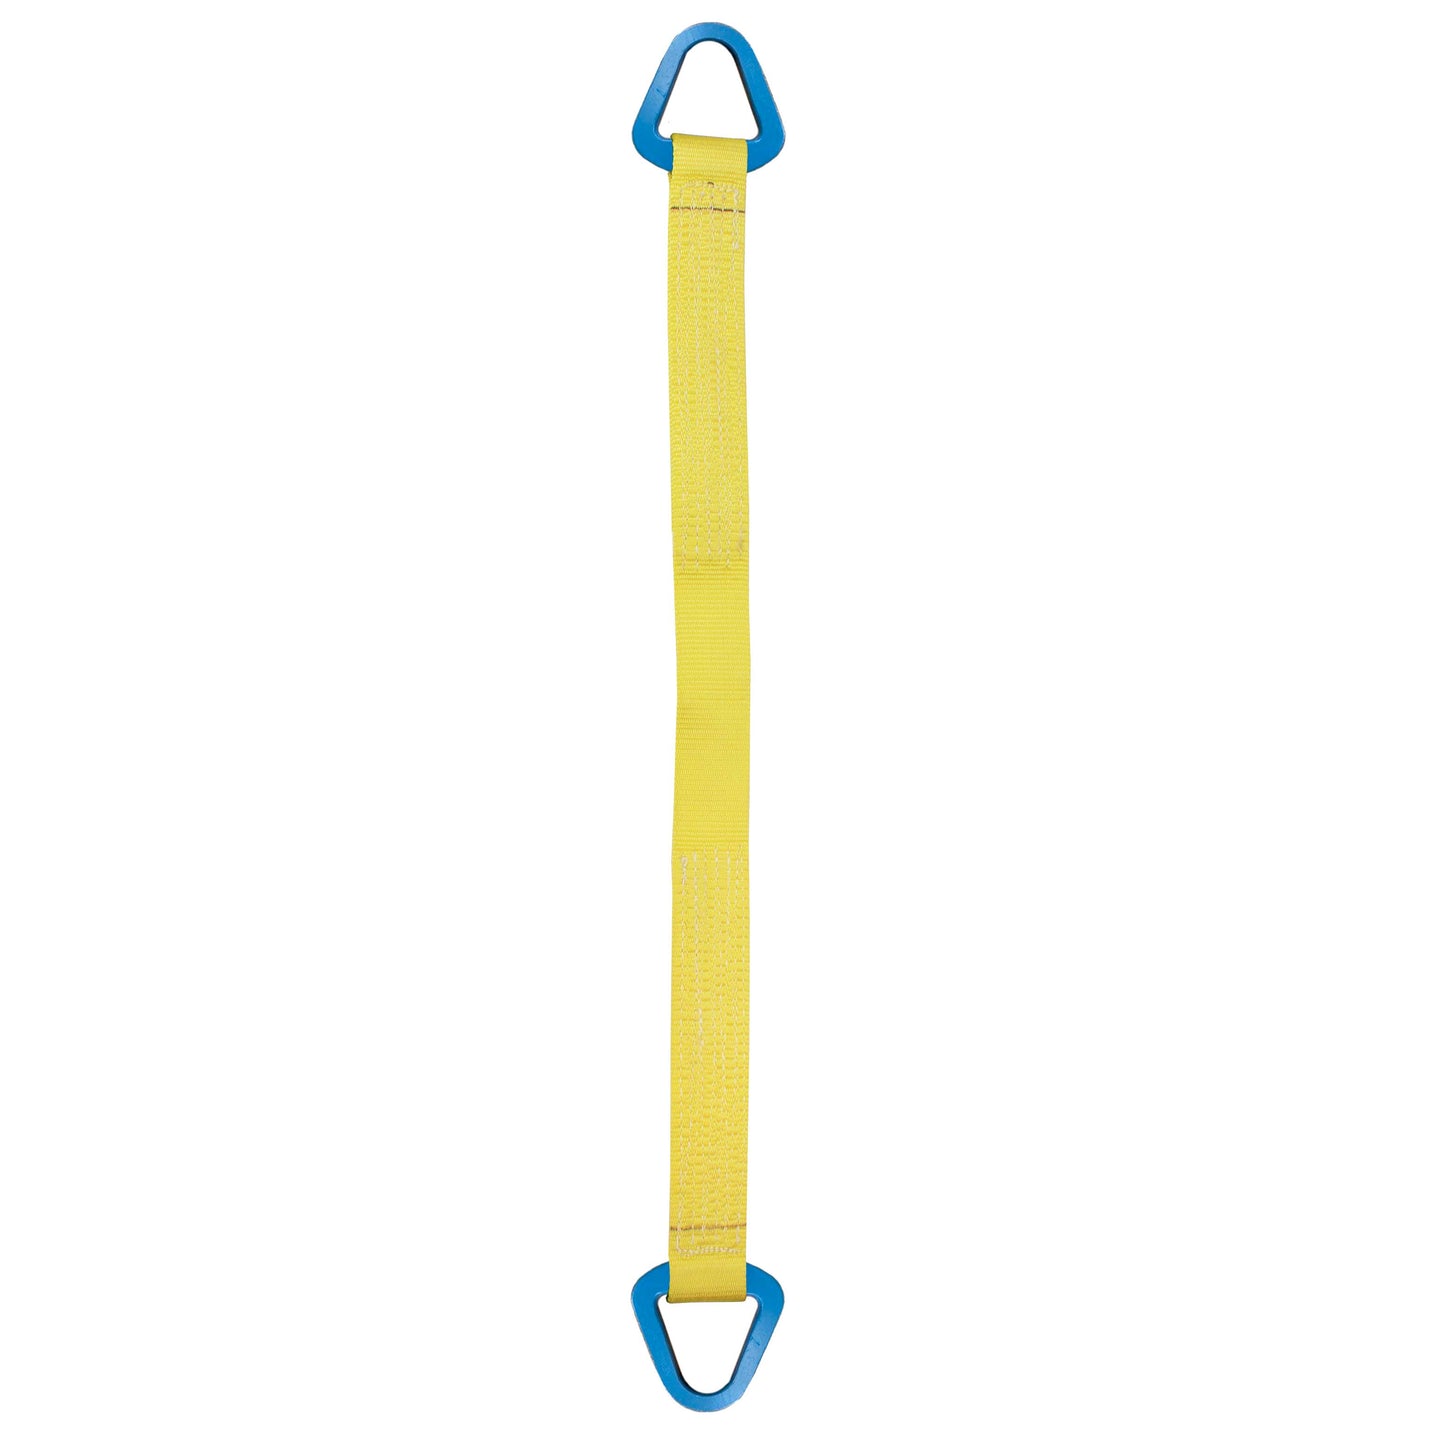 Nylon Lifting Sling Triangle 6 inch x 3 foot 1ply image 1 of 2